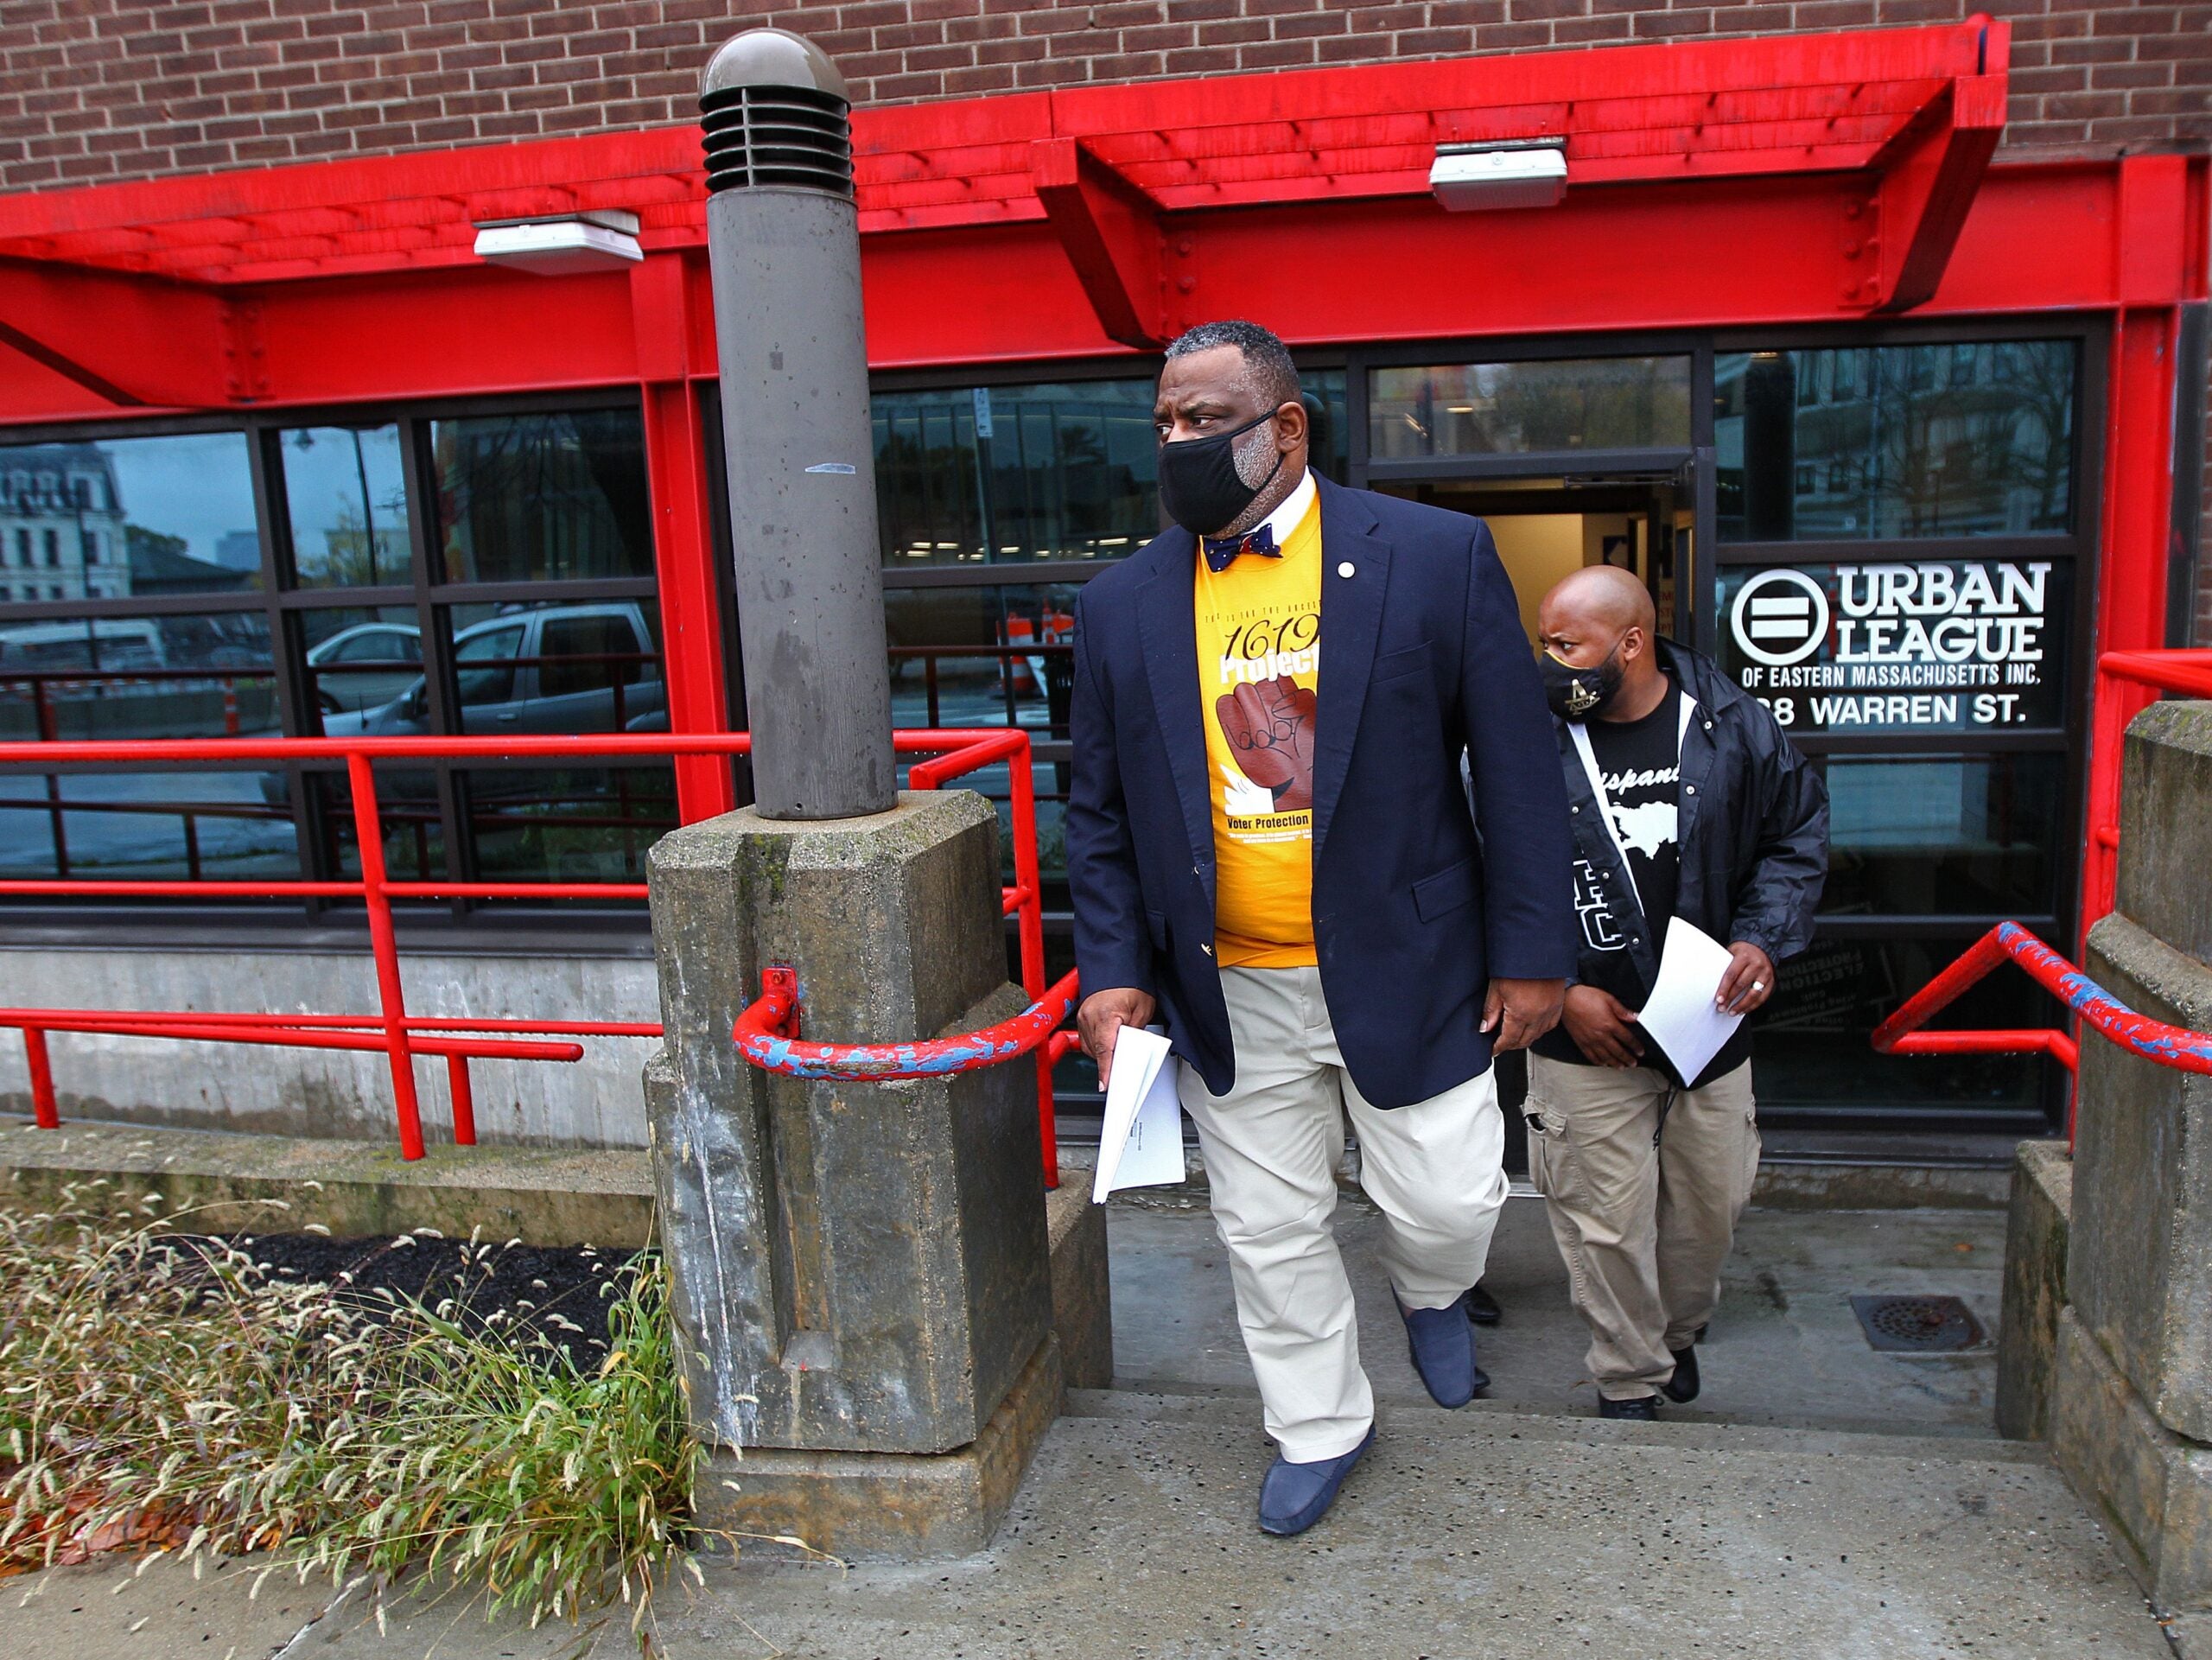 Two men in suit jackets and khaki pants exit the Urban League of Eastern Massachusetts building. Both men are wearing masks.